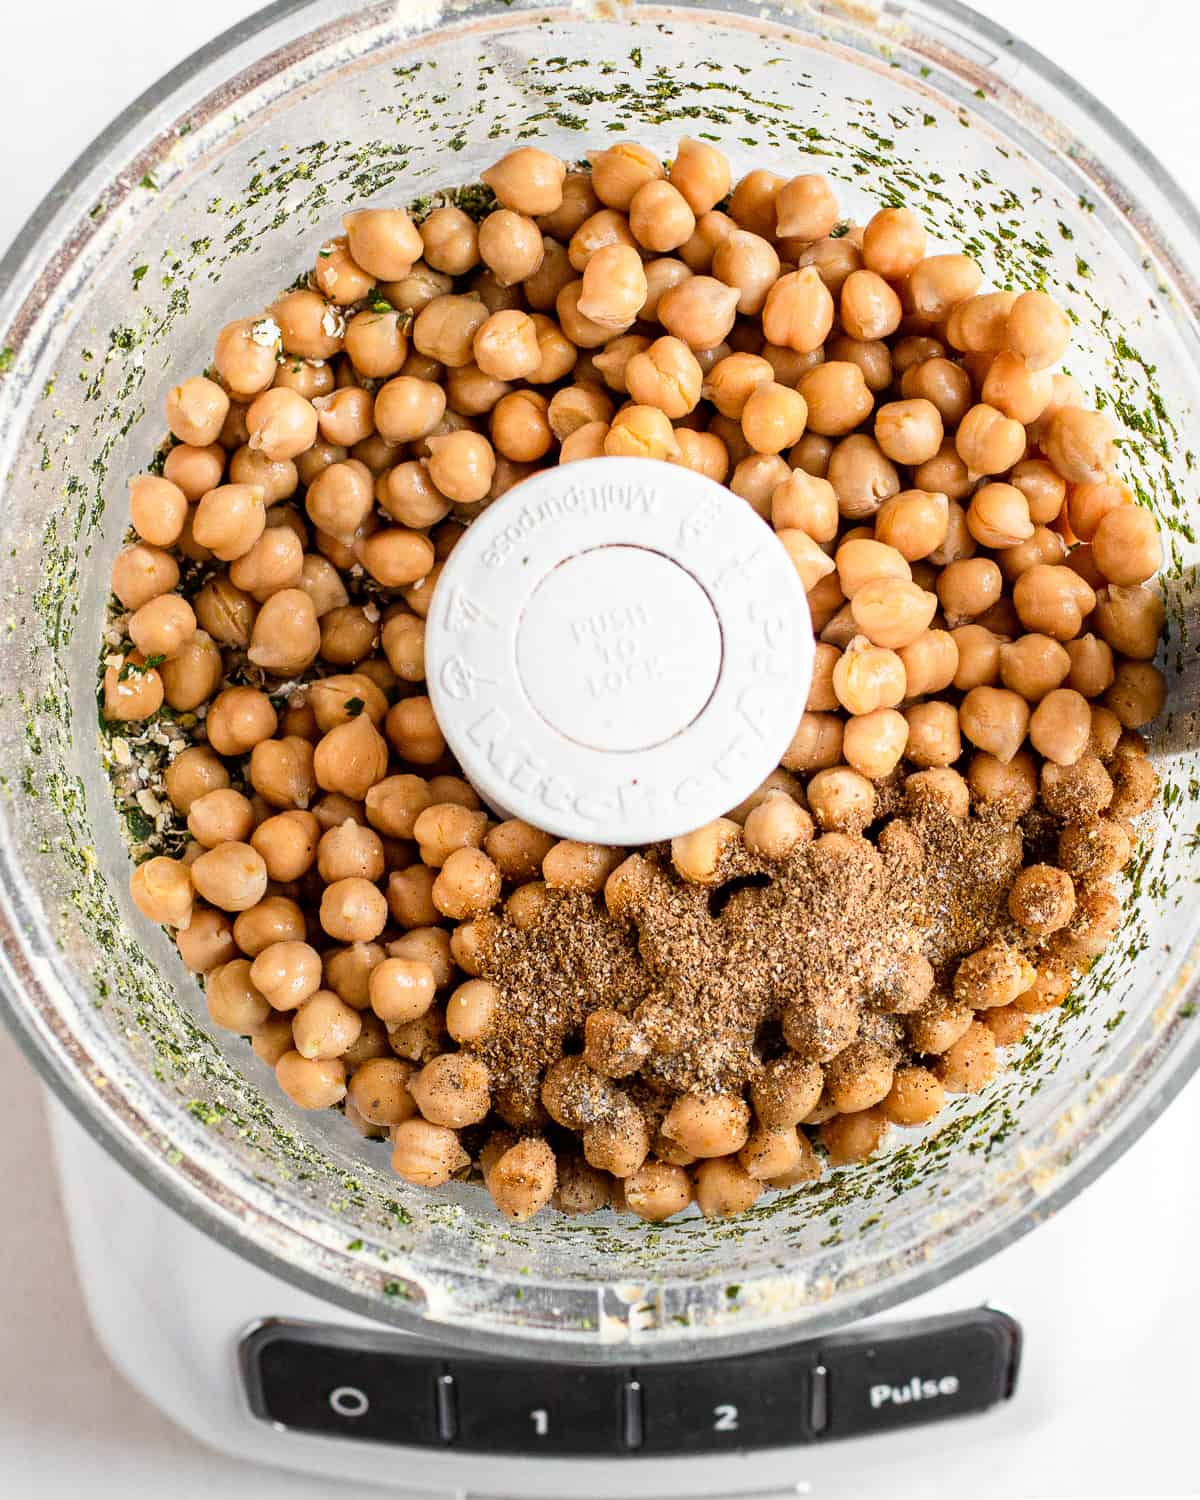 Herbs, drained canned chickpeas, and spices in a food processor.